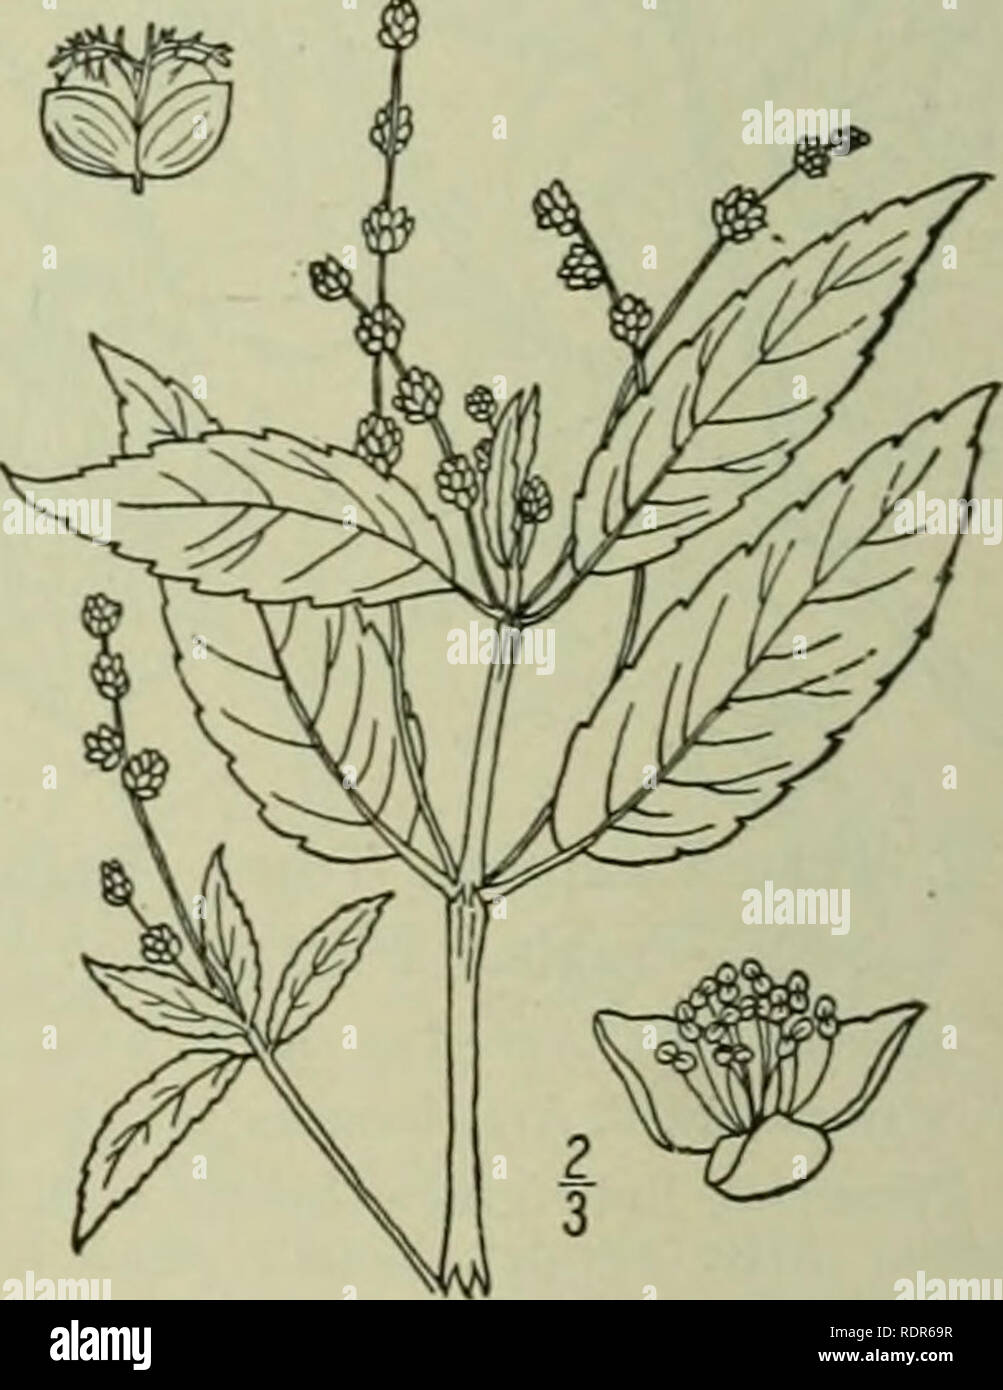 . An illustrated flora of the northern United States, Canada and the British possessions : from Newfoundland to the parallel of the southern boundary of Virginia and from the Atlantic Ocean westward to the 102nd meridian. Botany. EUPHORBIACEAE. 4. Tragia macrocarpa Willd. Twining or Large-fruited Tragia. Fig. 2-J2'/. Tragia cordata Michx. Fl. Bor. Am. 2: 176. 1803. Not Vahl. 1790. Tragia macrocarpa Willd. Sp. PI. 4: 323. 1806. Perennial, twining, slightly hirsute. Stem slender. io'-4i° long, branched; leaves ovate, 2-4*' long, deeply cordate, coarsely dentate-serrate, long-acuminate; pe- tiole Stock Photo